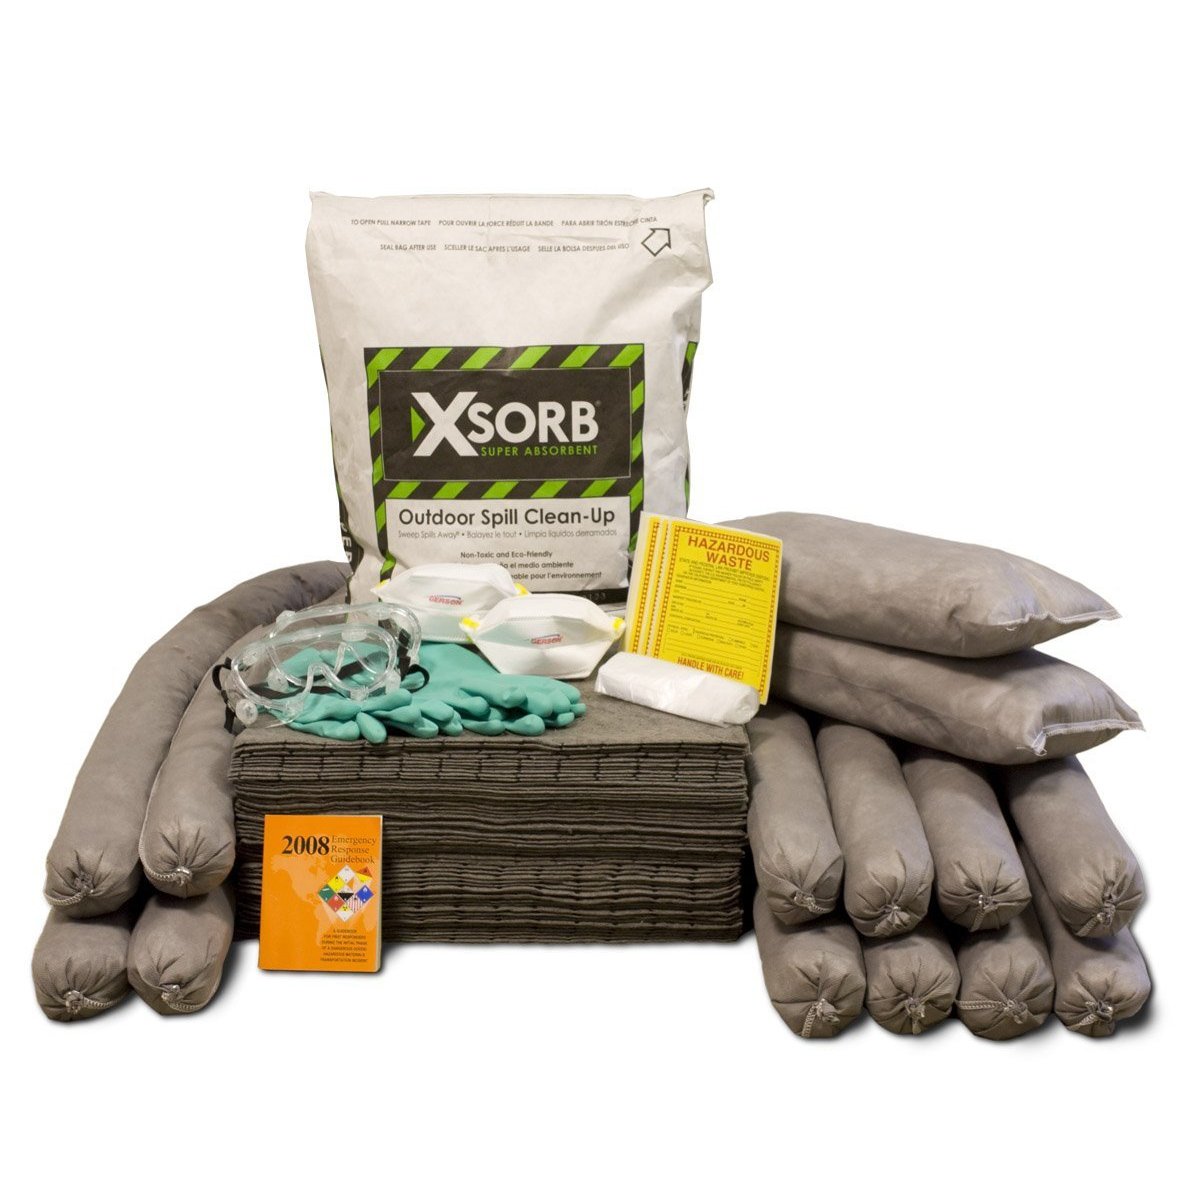 XSORB Outdoor All-Purpose 55 gal Spill Kit - 1 DRUM